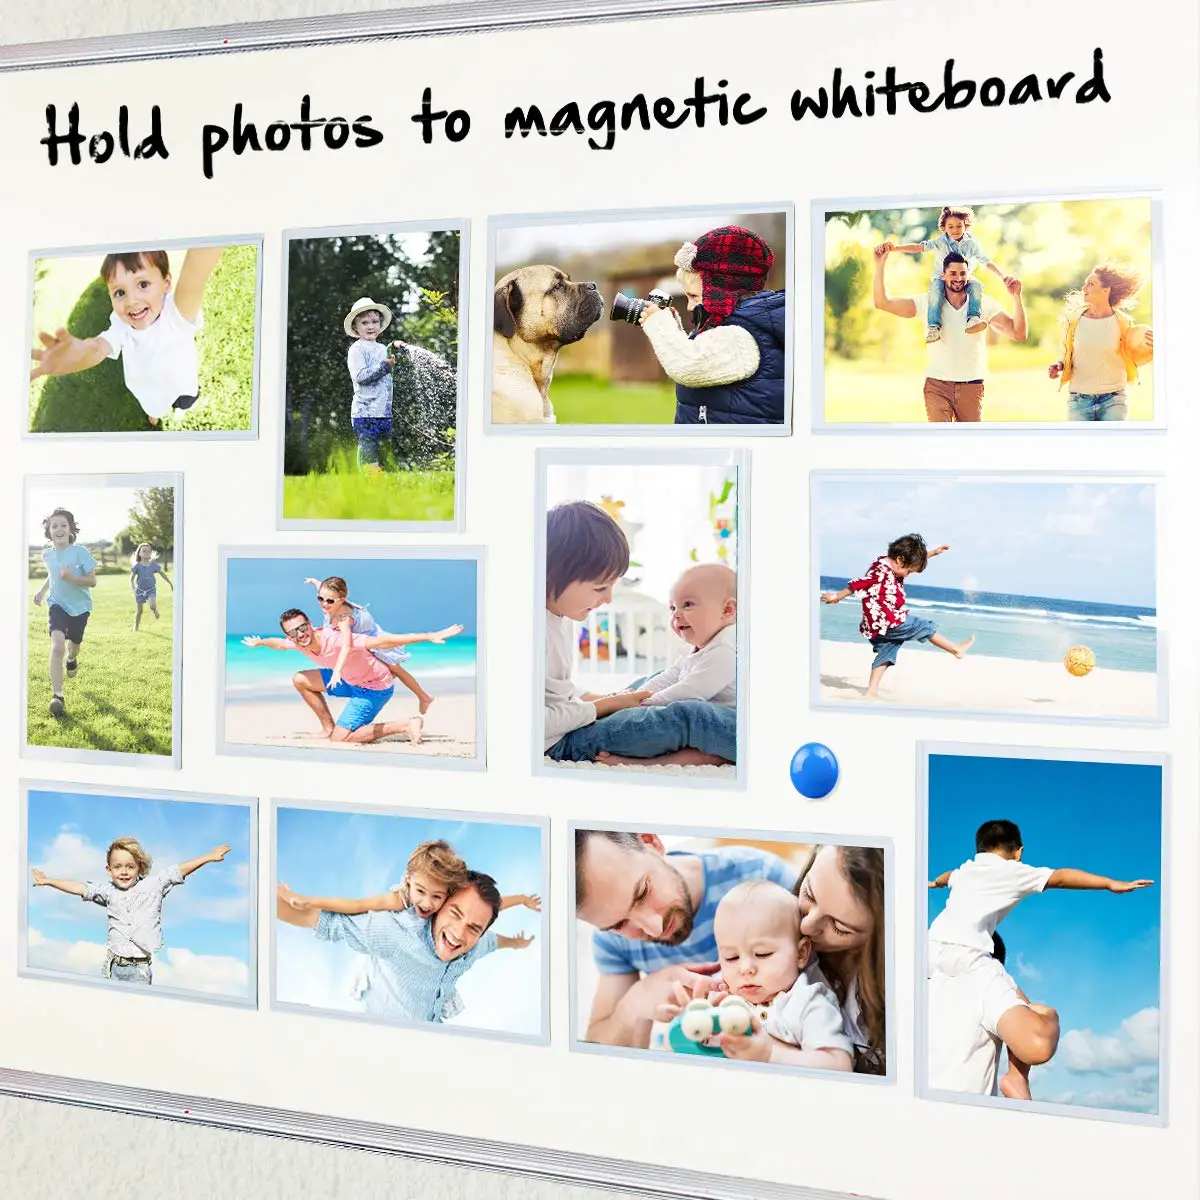 HIIMIEI Magnetic Picture Frames for Refrigerator 4x6 Fridge Magnets Photo Frame 